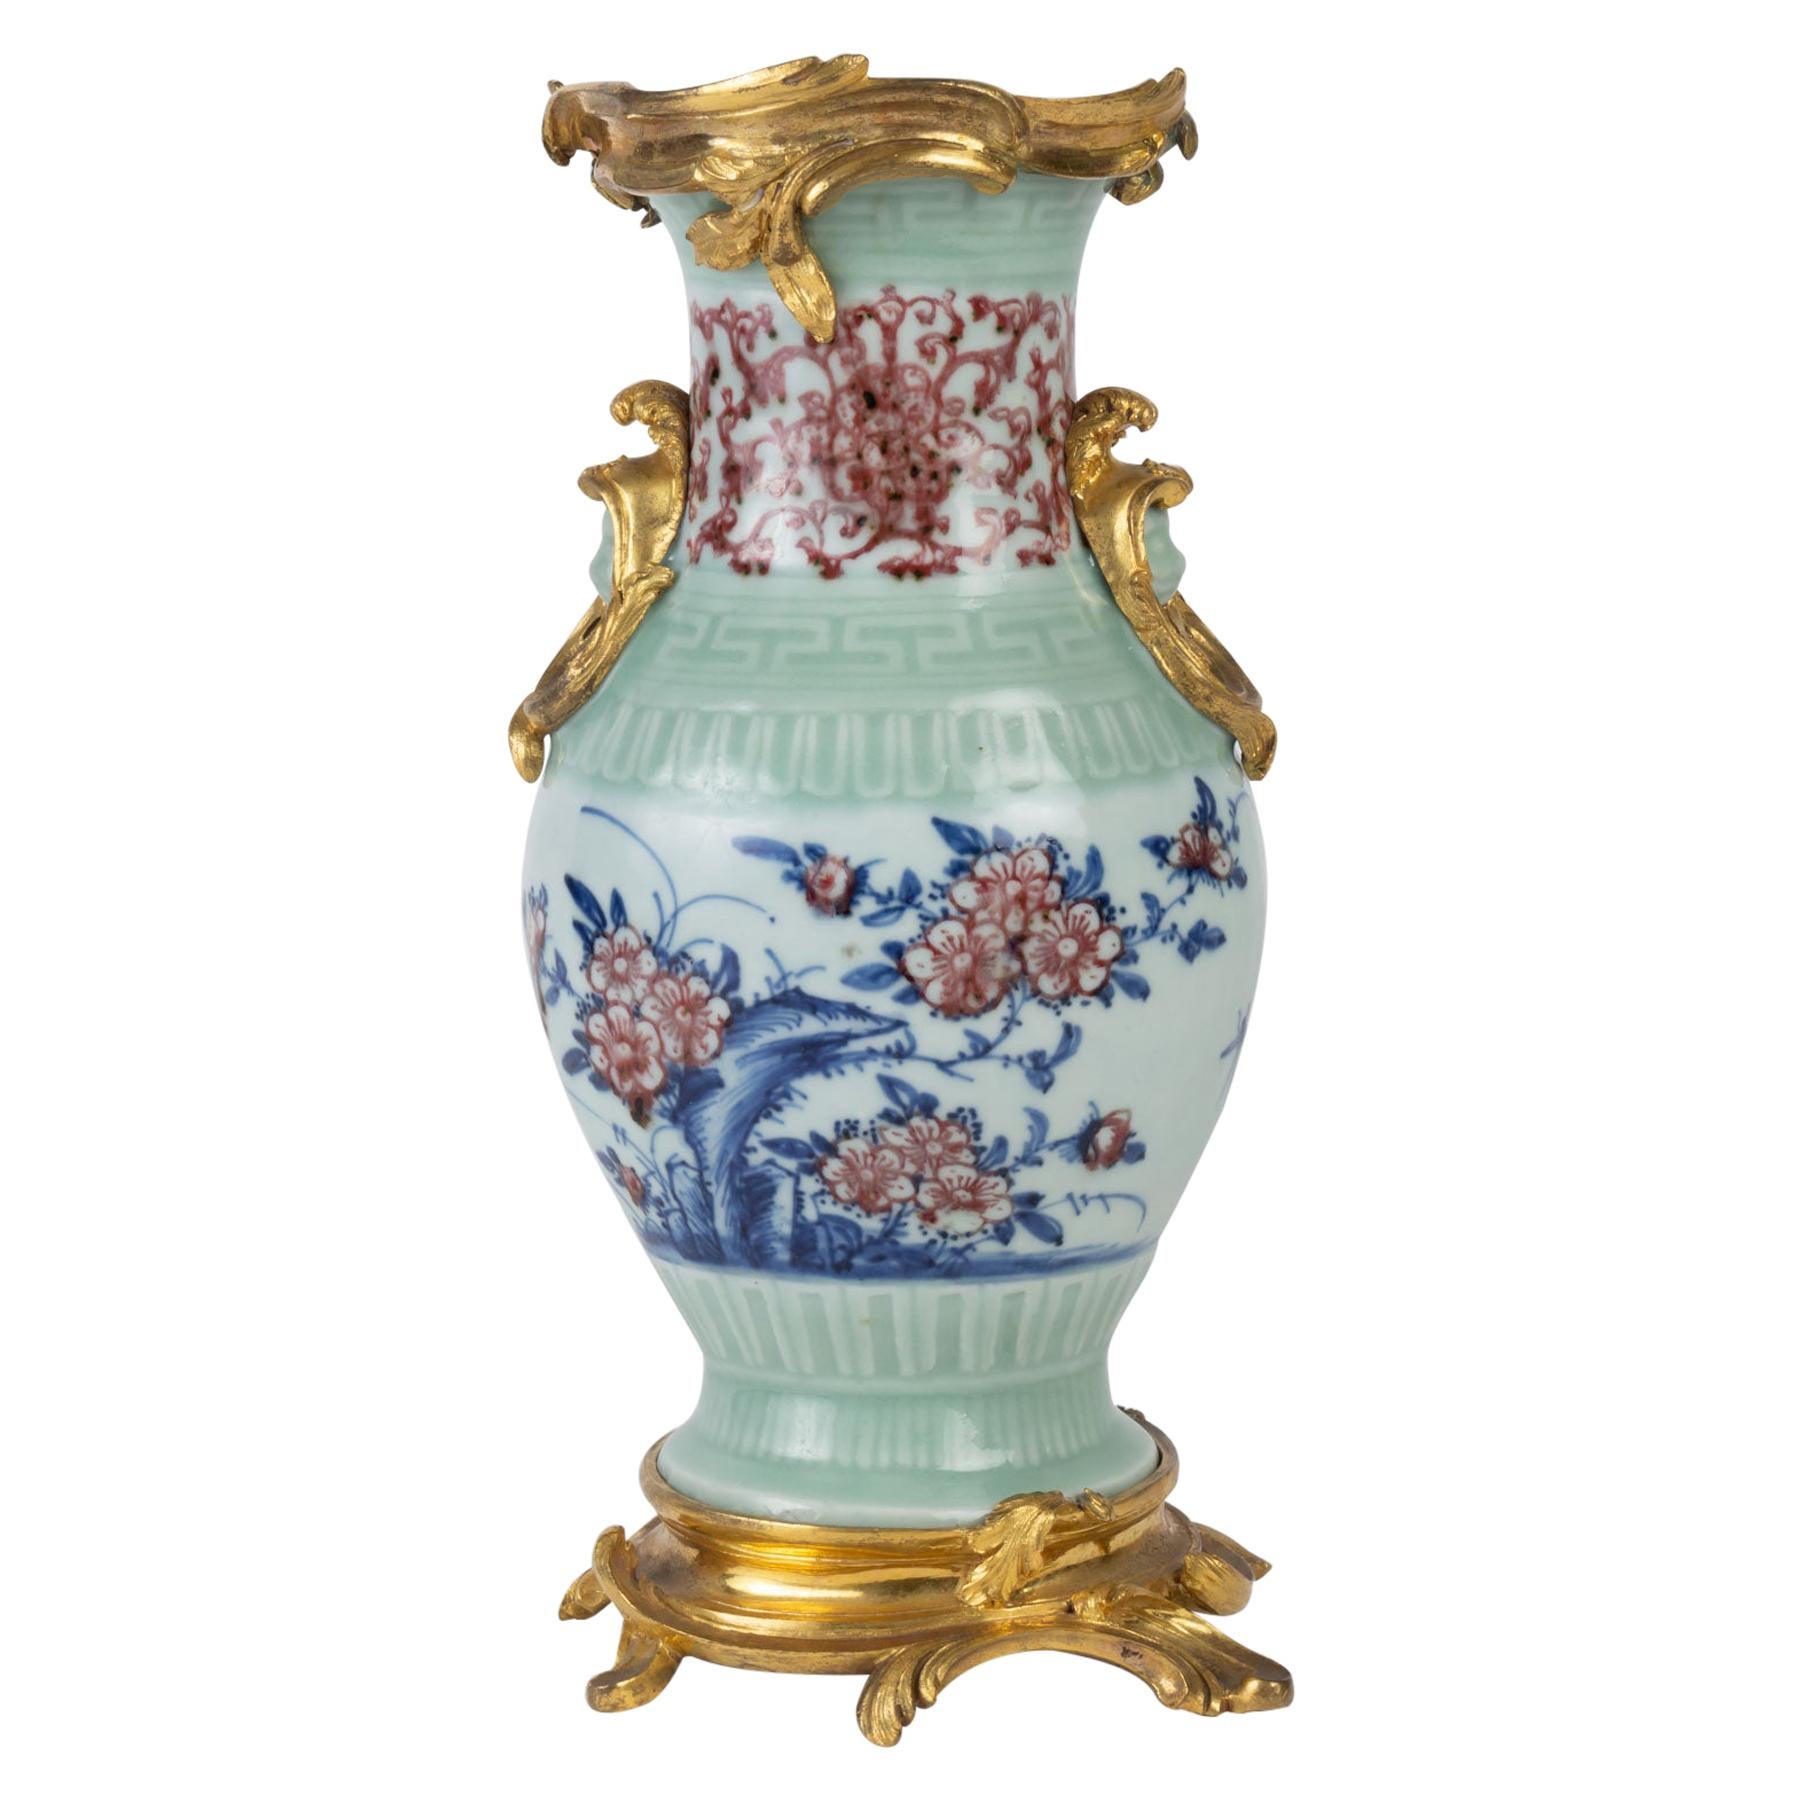 Mounted Porcelain Vase, Gilt Bronze and Chiselled, 18th Century